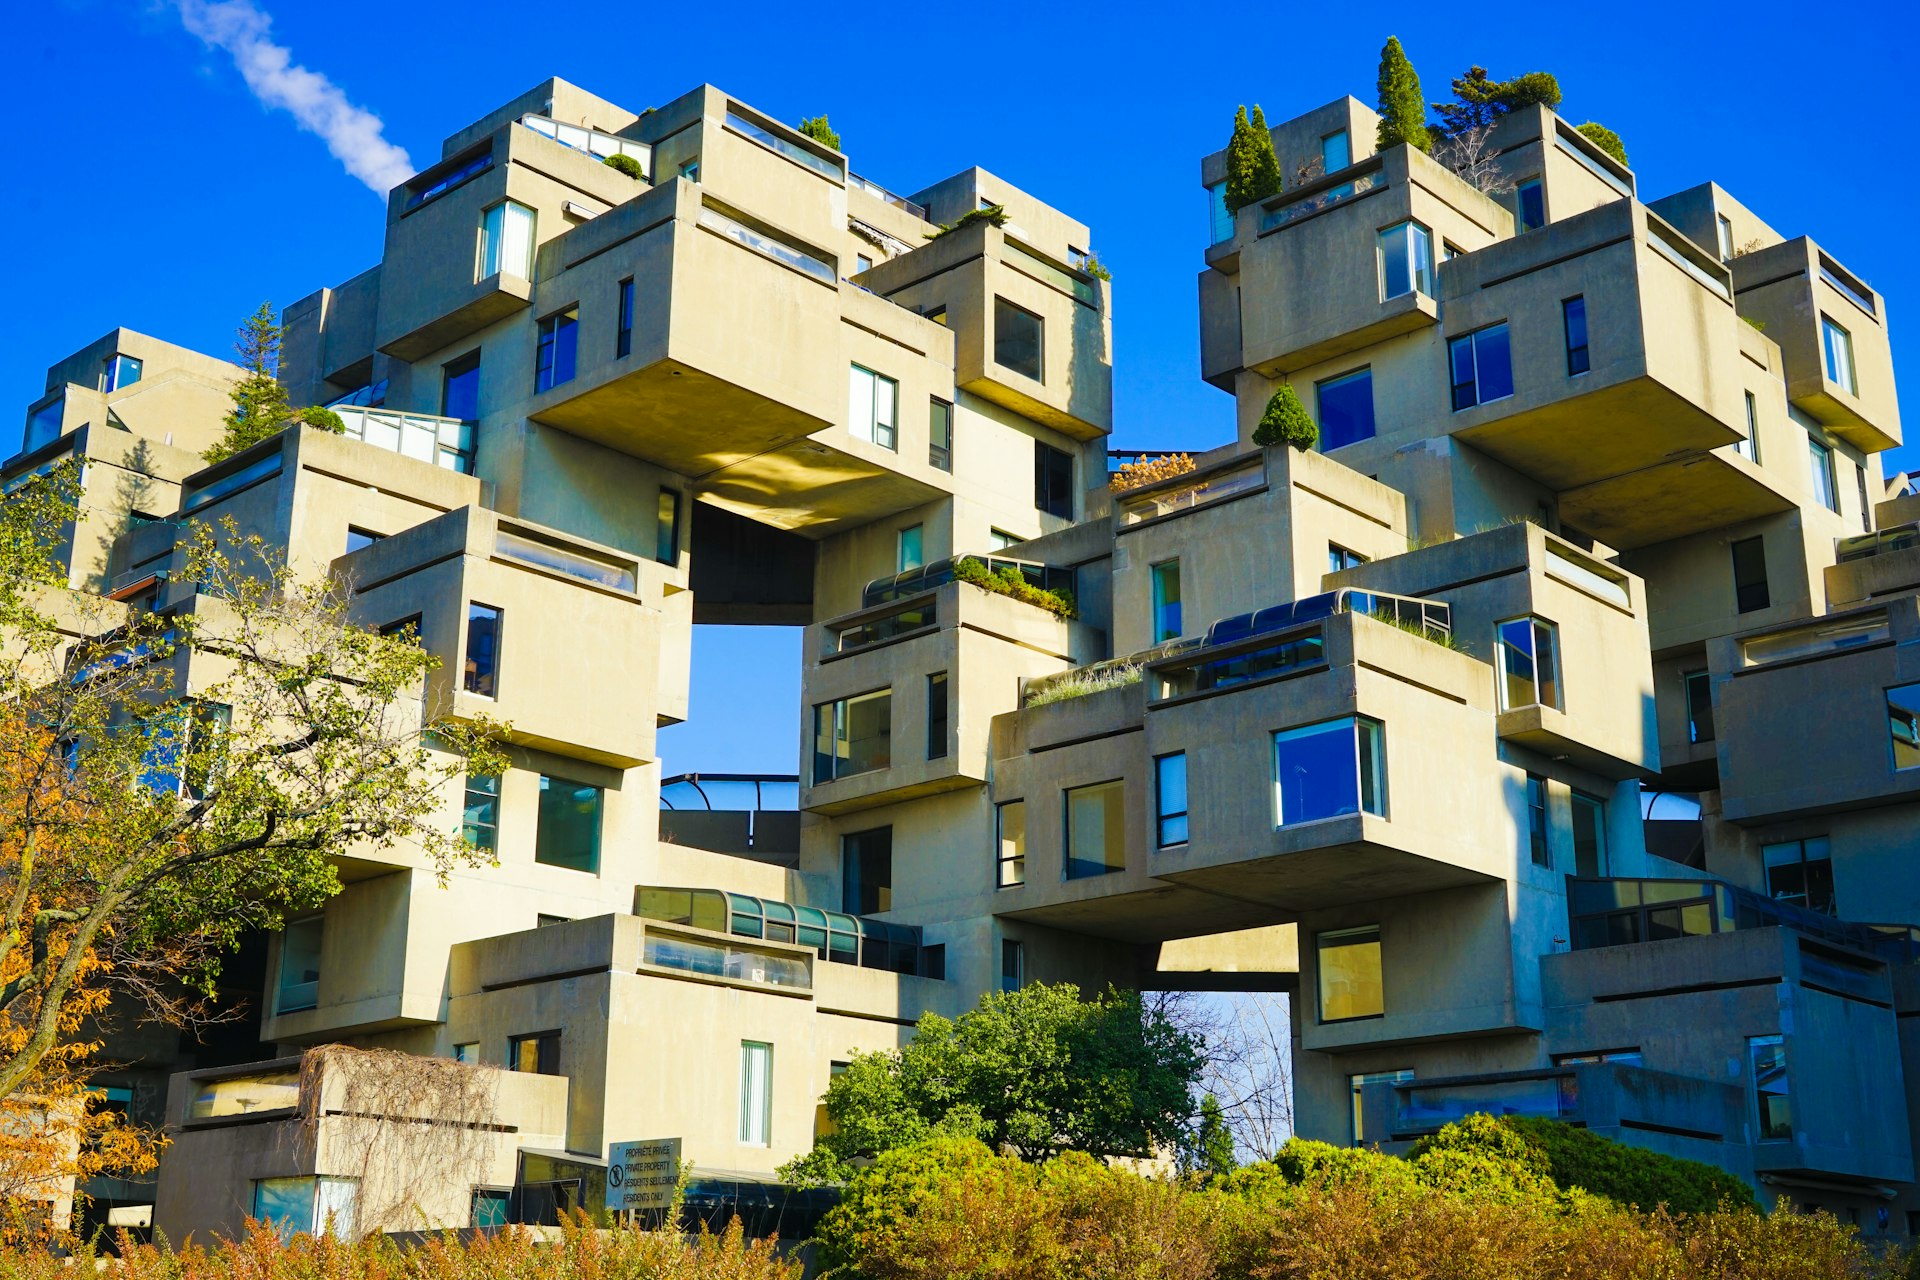 The eye-catching concrete forms of Habitat 67, Montreal